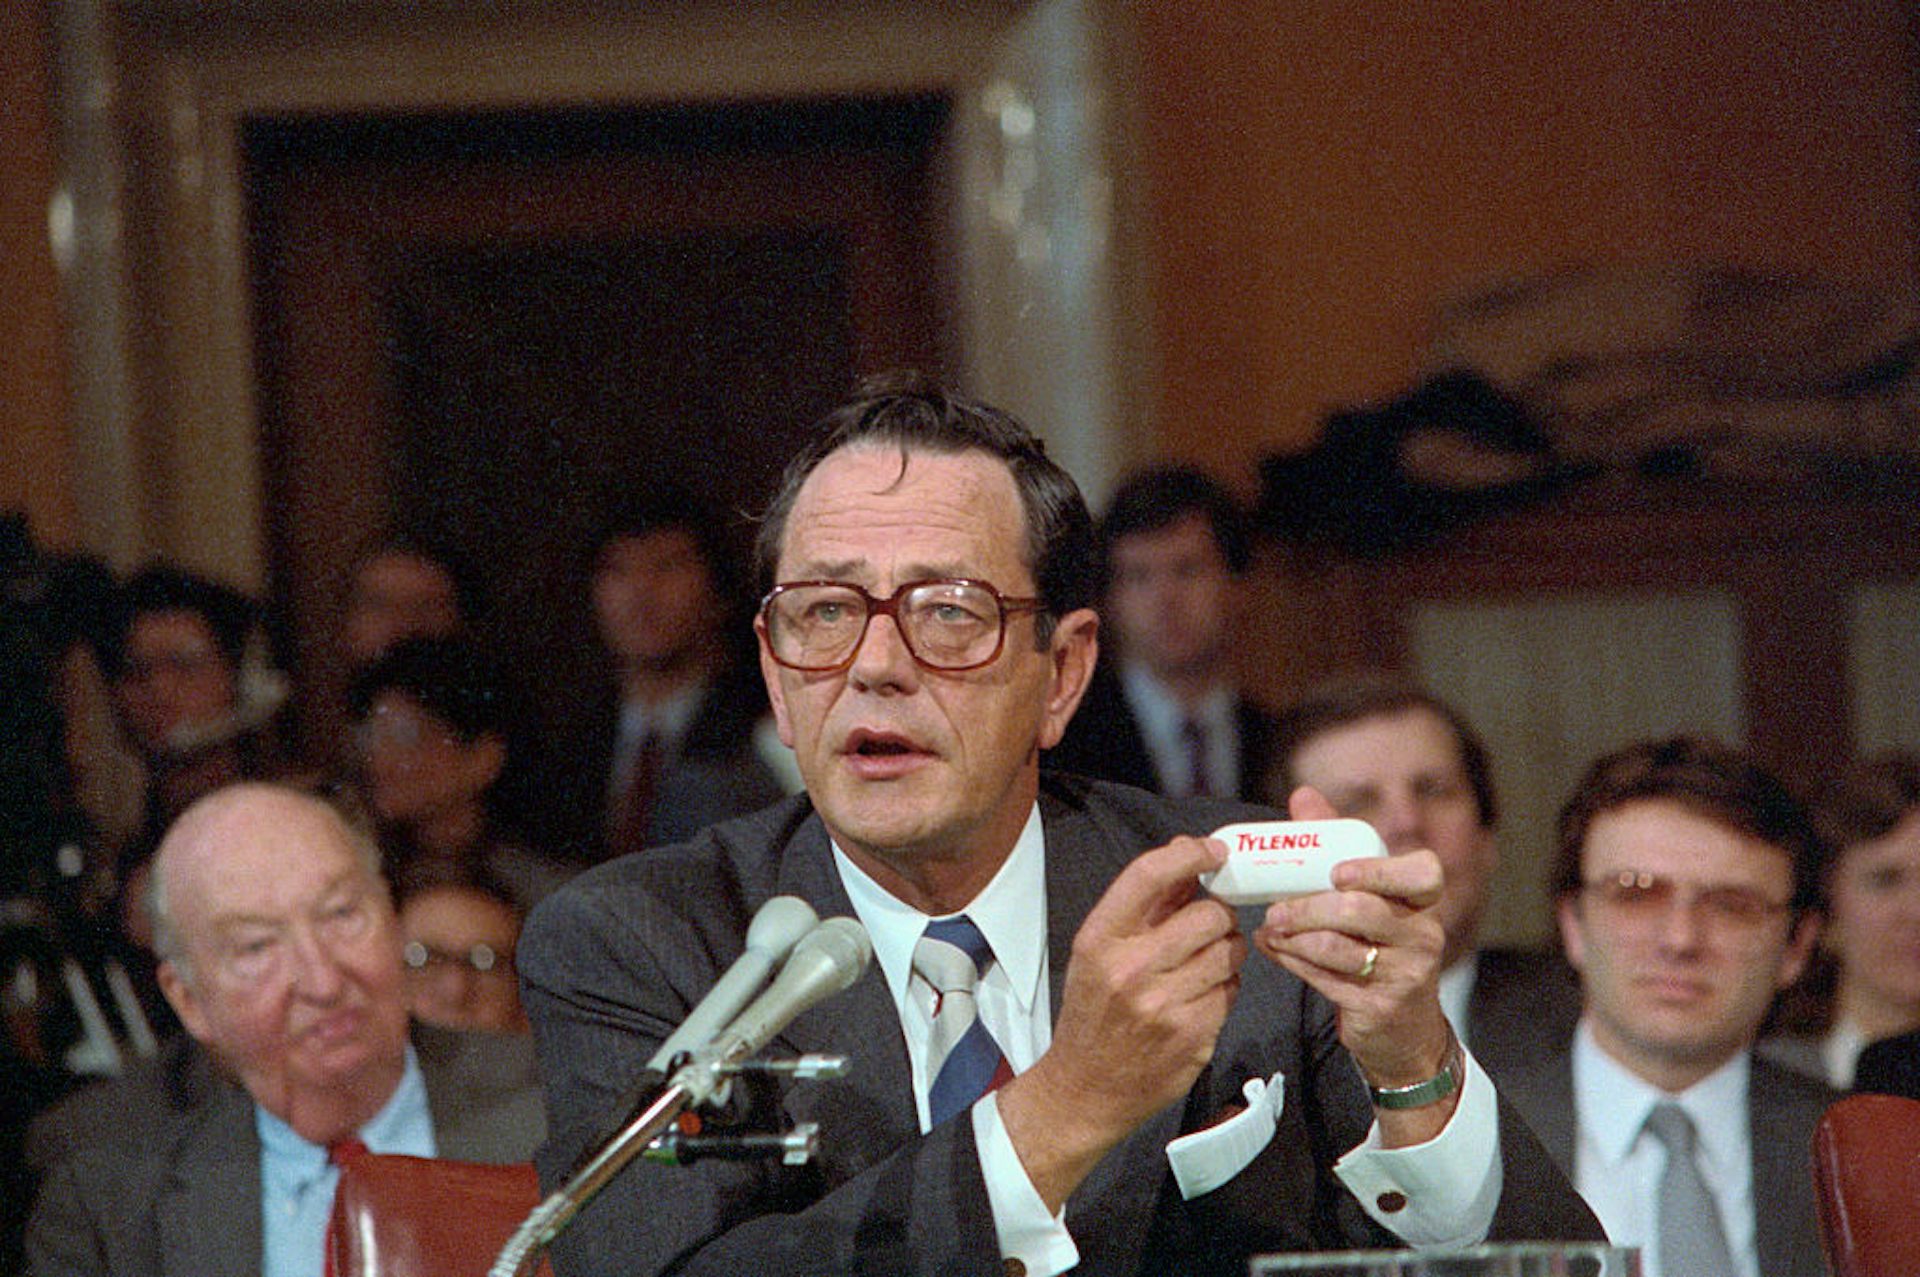 Man wearing glasses and suit speaks into microphone while holding a white bottle of pills.